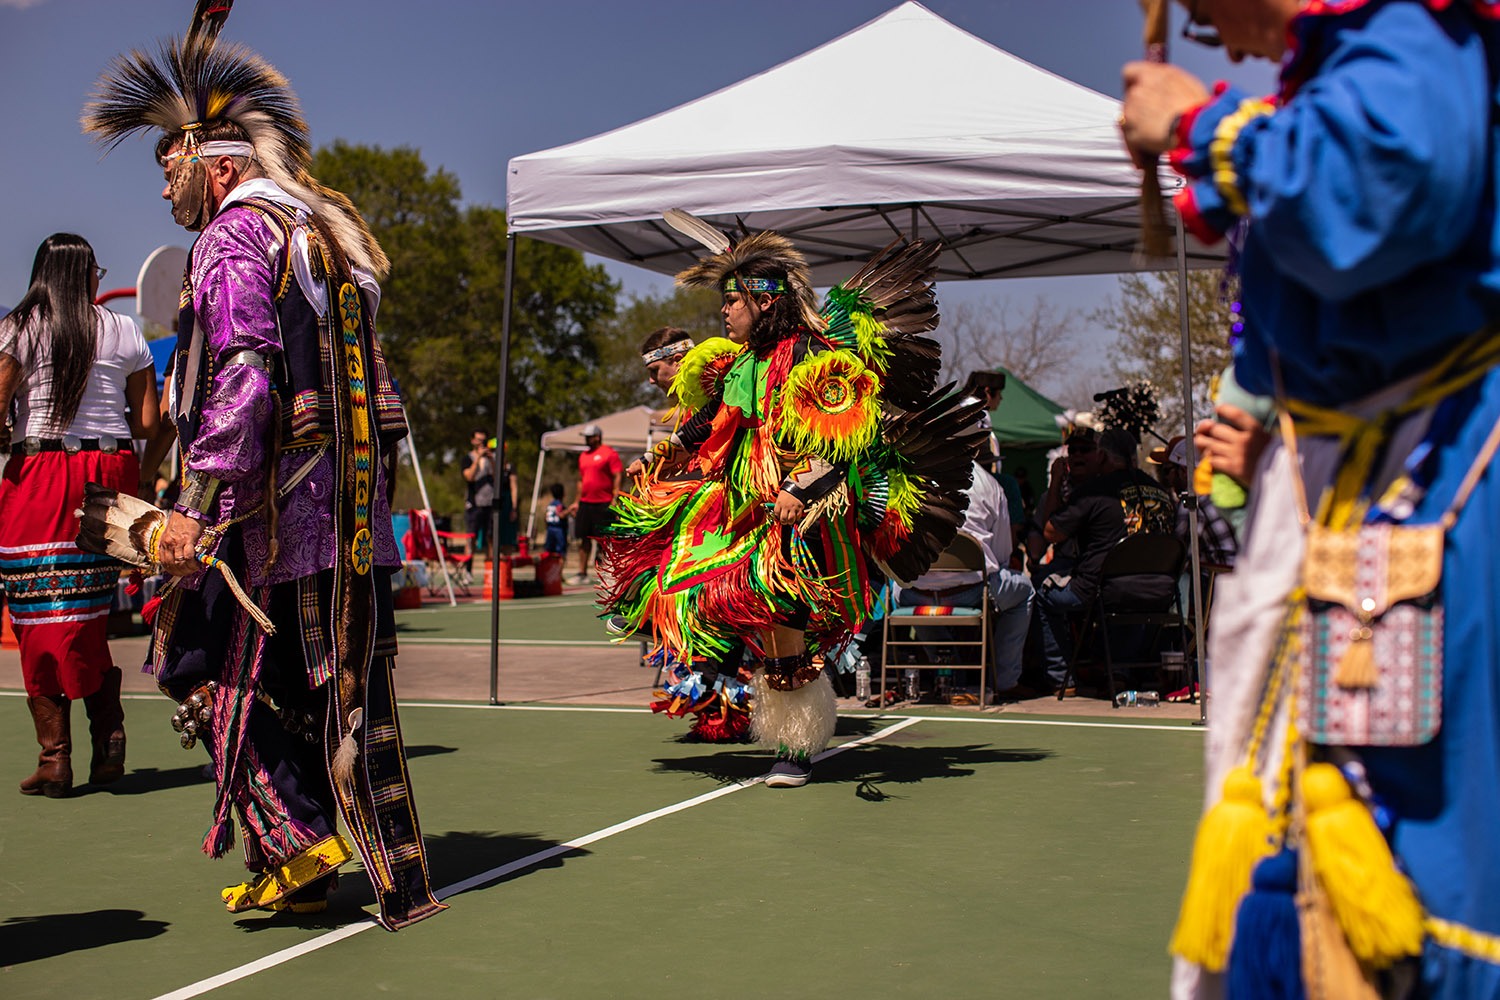 Robby Soto dances to the drums at a Native American Fiesta Pow Wow at Mission County Park #2, San Antonio, Texas. Photo by Kaylee Greenlee Beal | Heron contributor